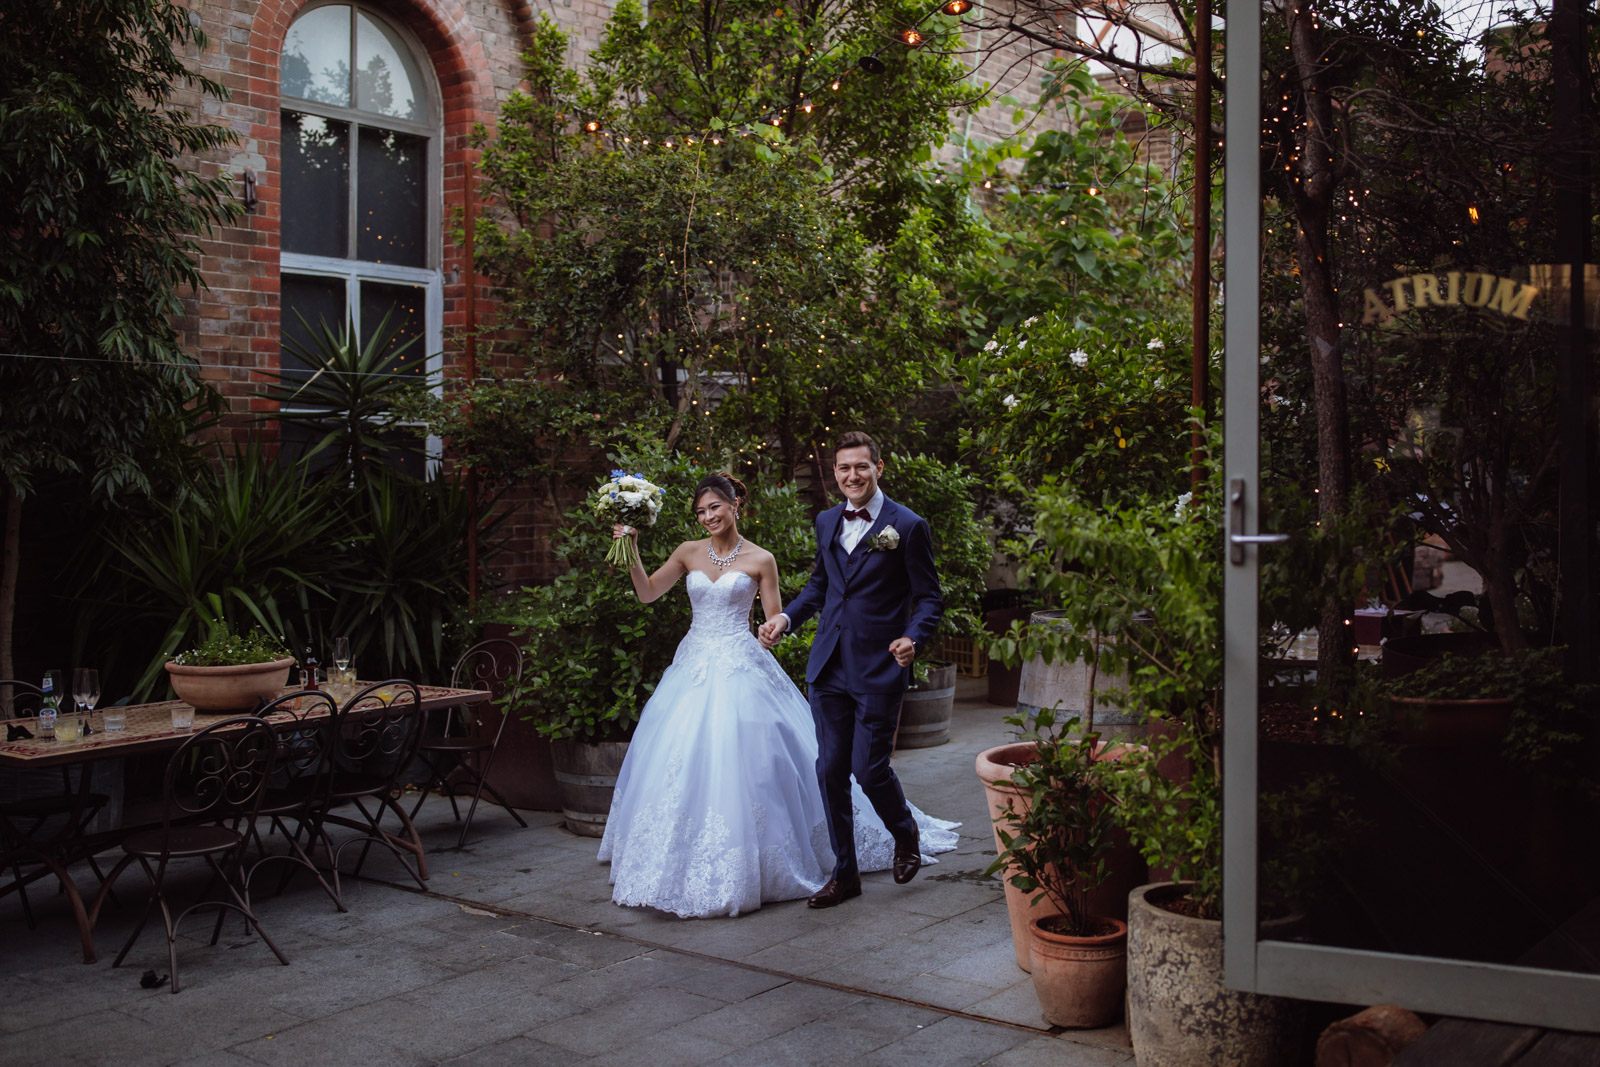 A man and woman walking holding hands, smiling. The woman is wearing a white wedding ballgown and the man is wearing a navy blue suit. In the background is a wooden table with some ornate metal chairs. The table has some wine glasses on them. In the background is a building and a lot of pot plants, large and small. In the foreground is an open glass door reading “The Atrium”.